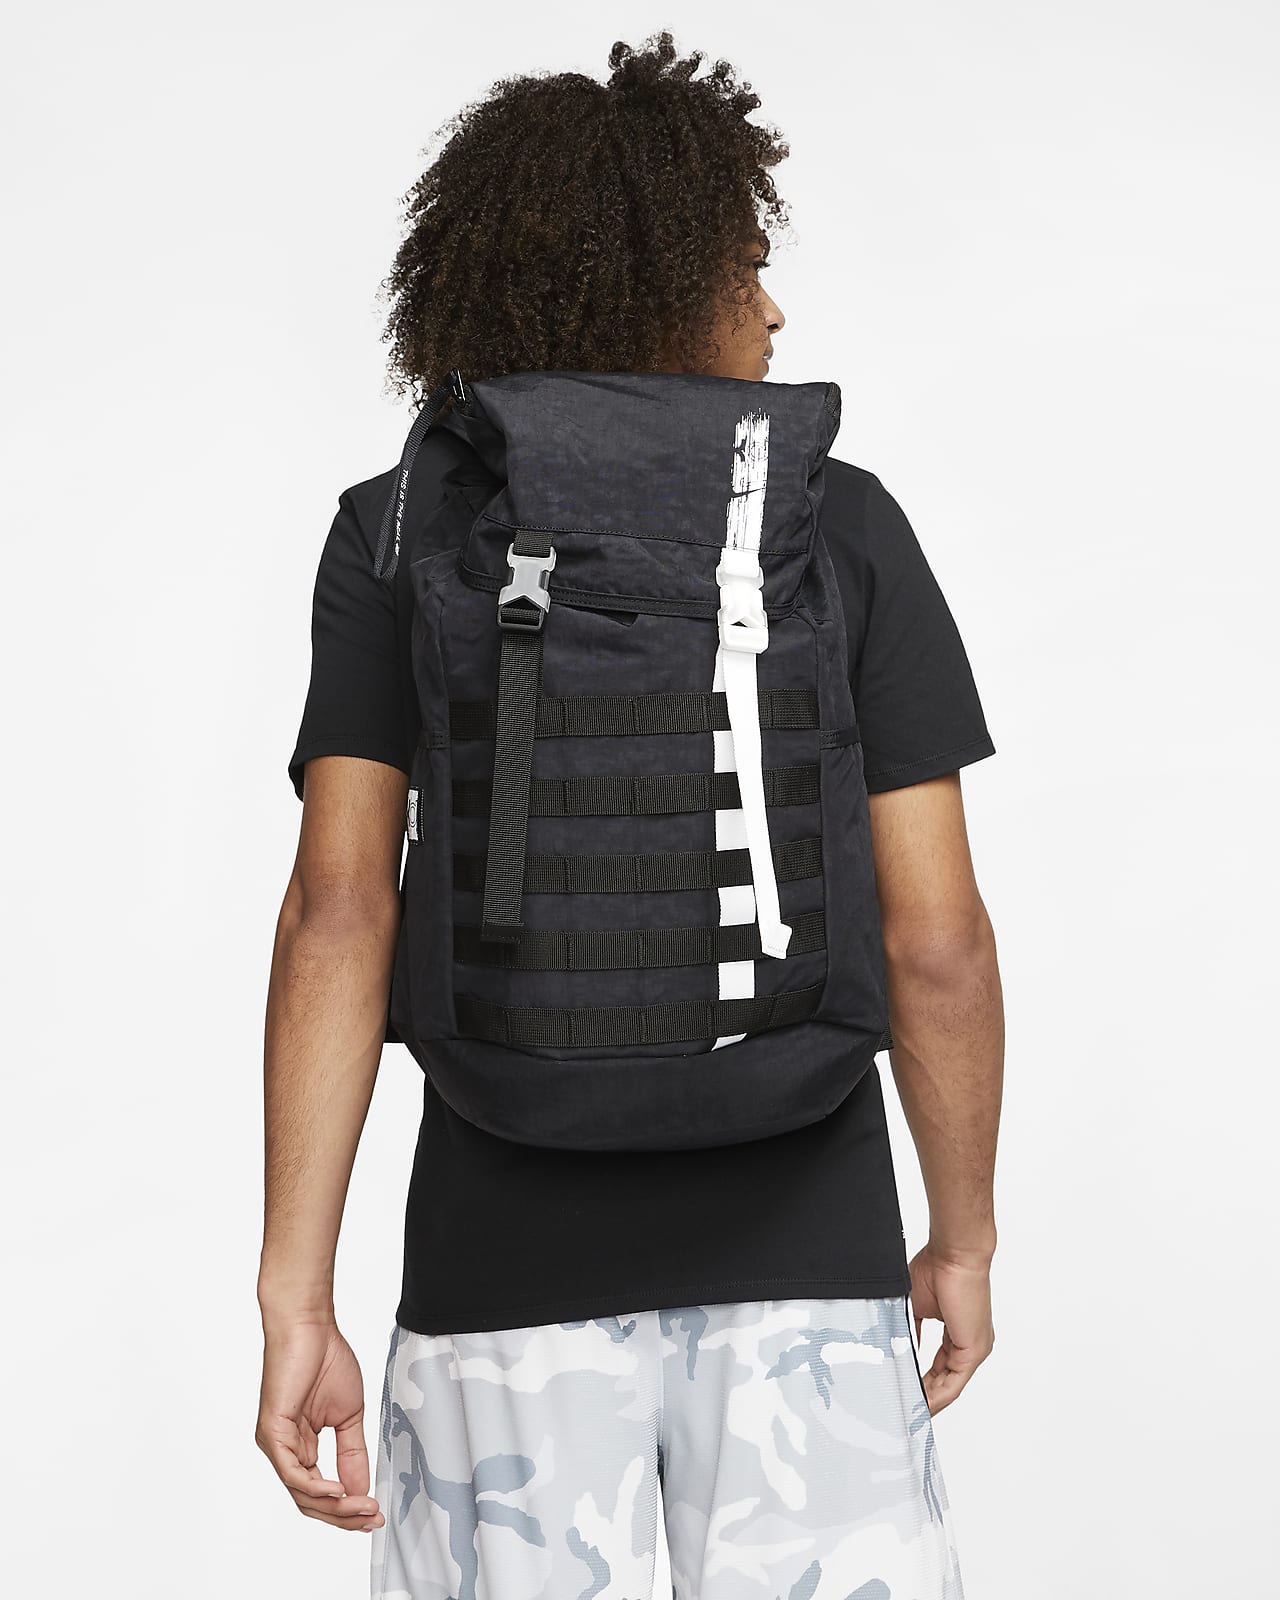 new kd backpack for sale